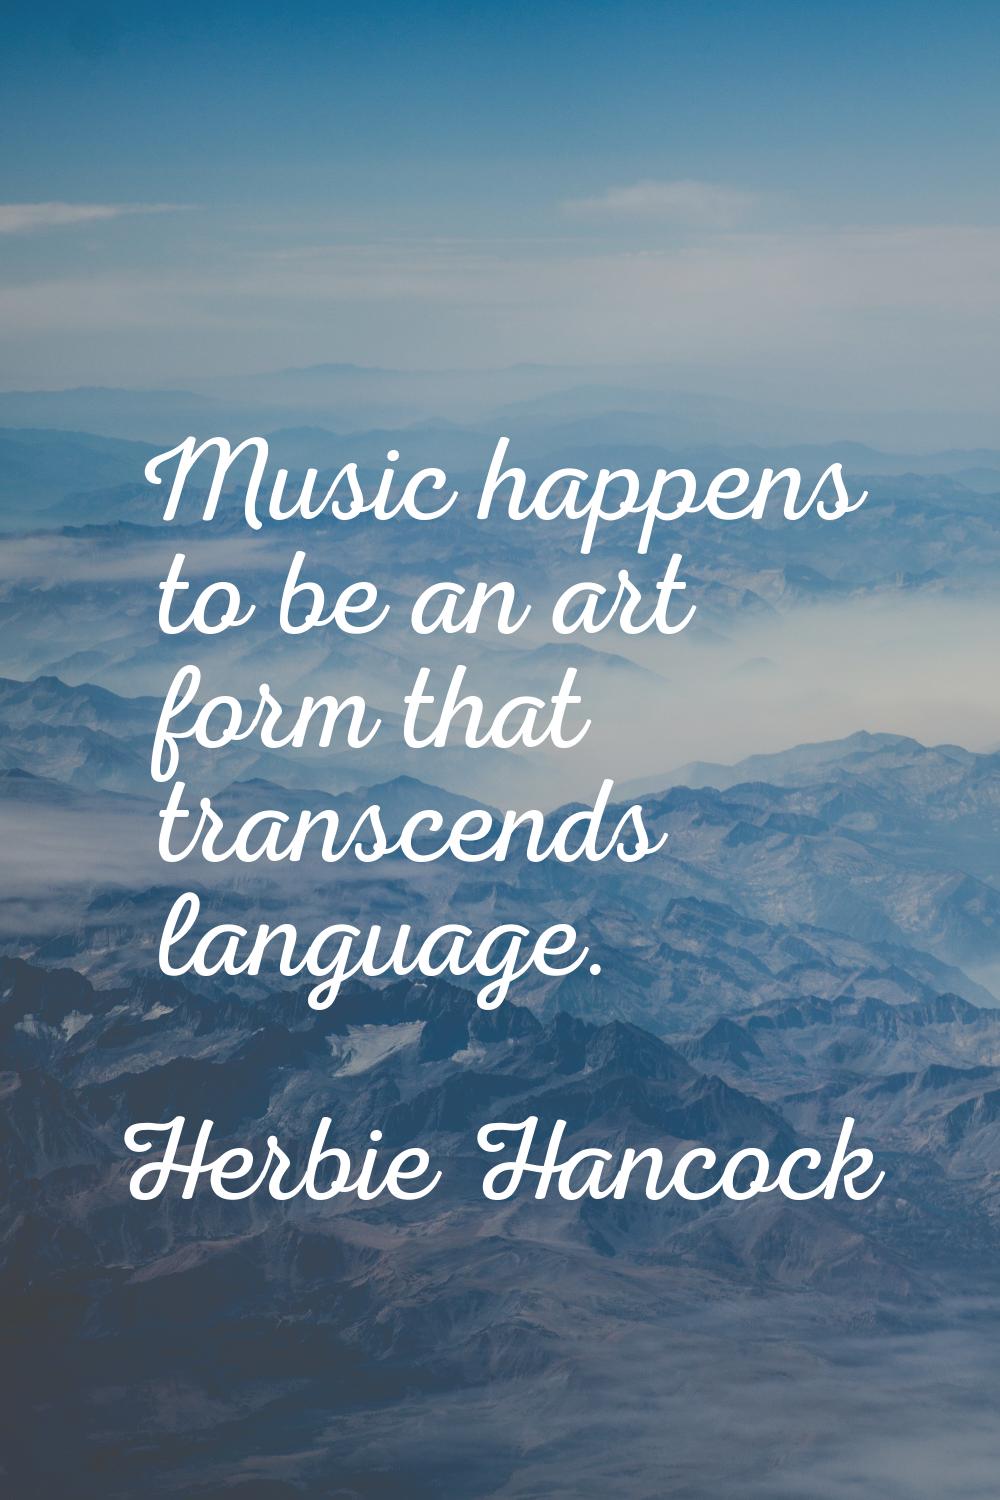 Music happens to be an art form that transcends language.